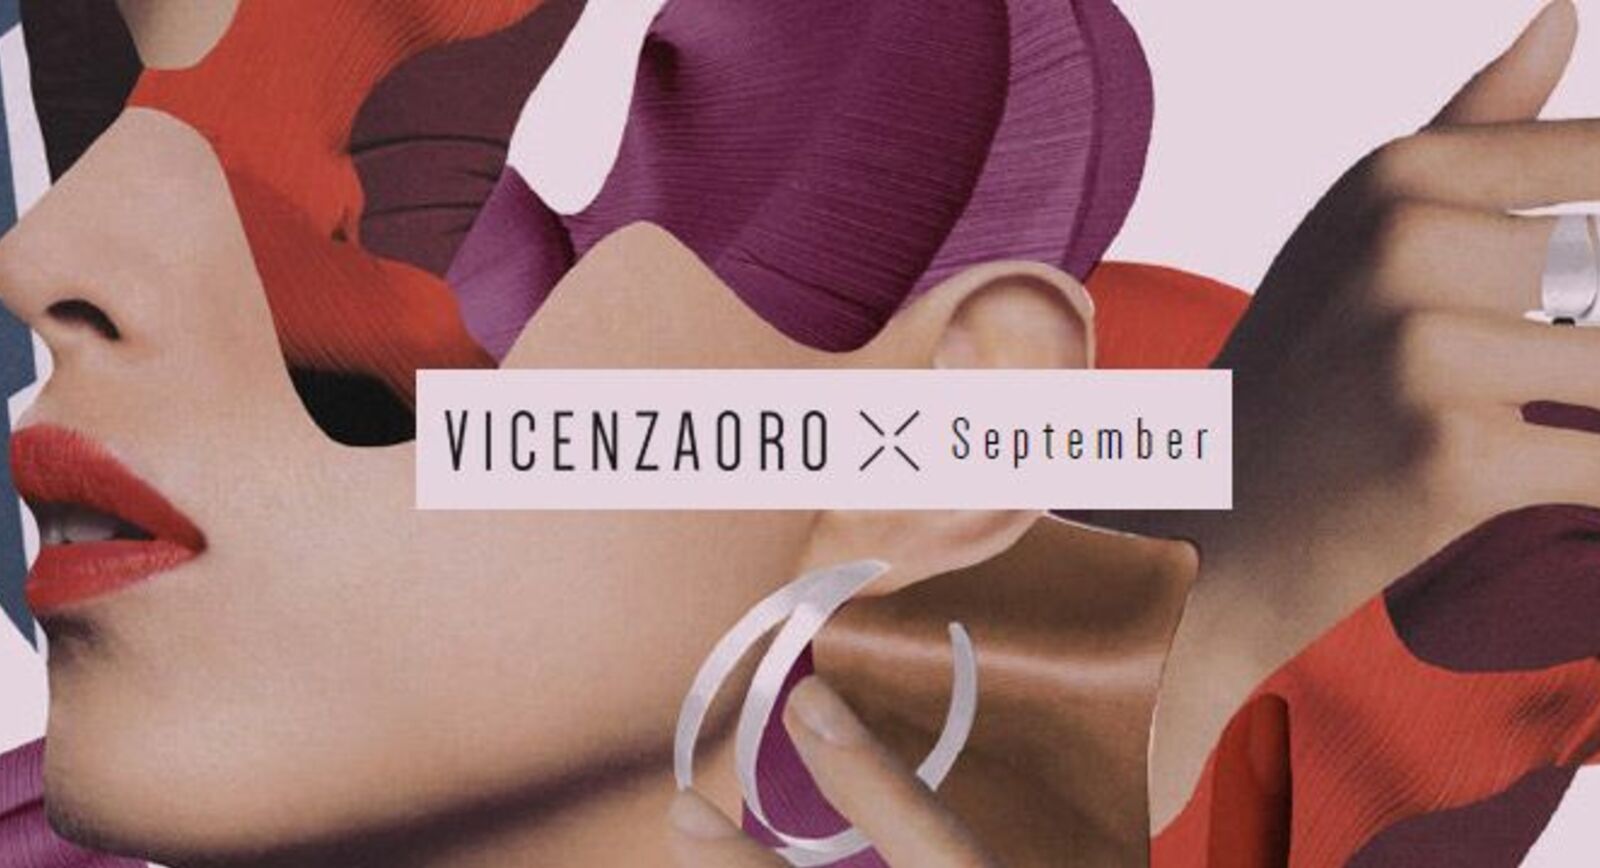 VicenzaOro 2015: TOP 5 Brands On My Must – See List